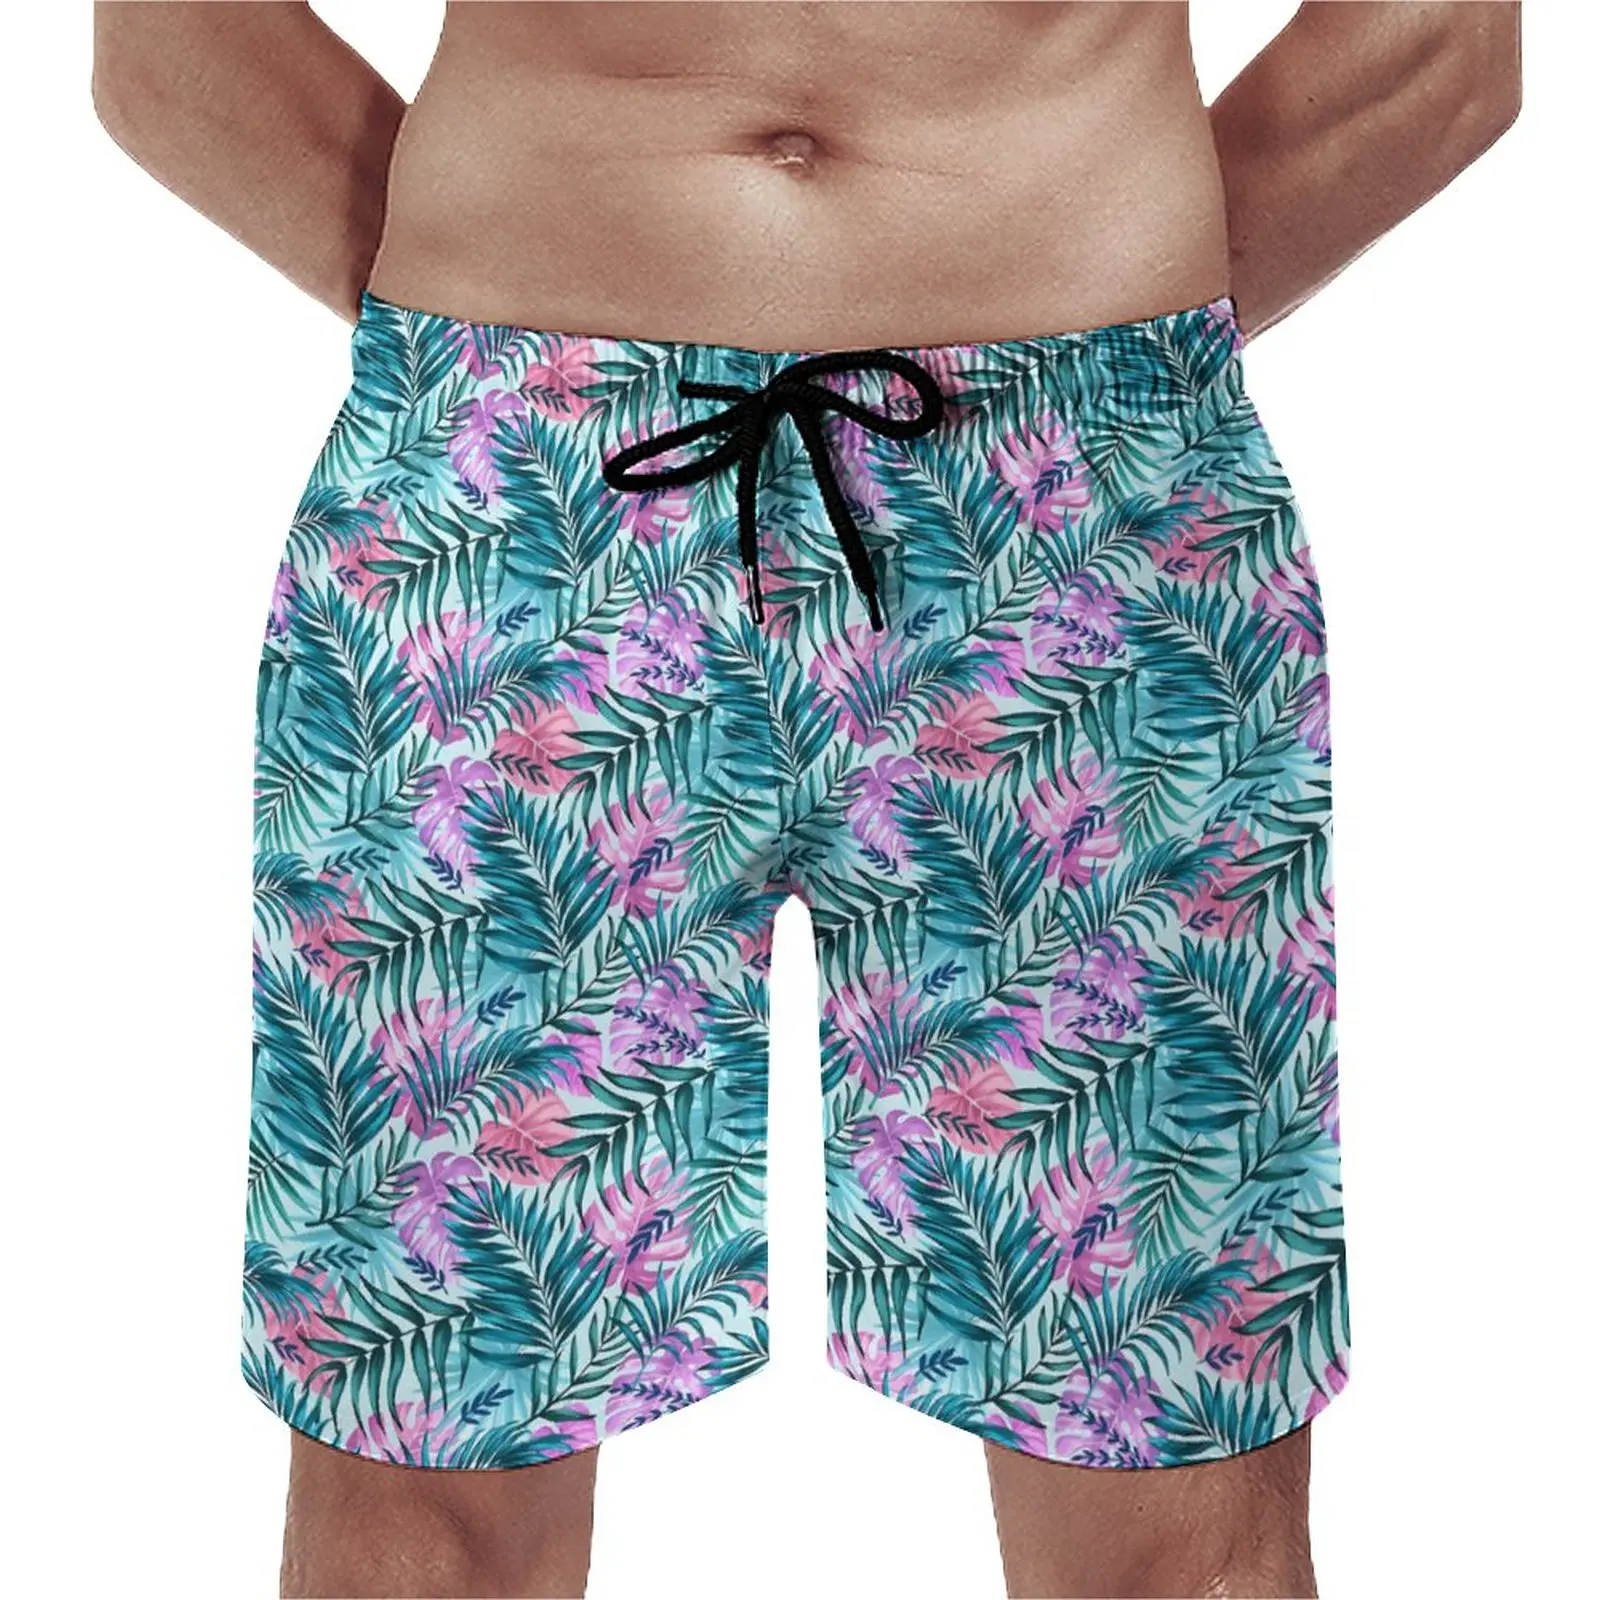 

Tropical Palm Board Shorts Summer Monstera Leaves Surfing Beach Short Pants Males Fast Dry Hawaii Design Large Size Beach Trunks